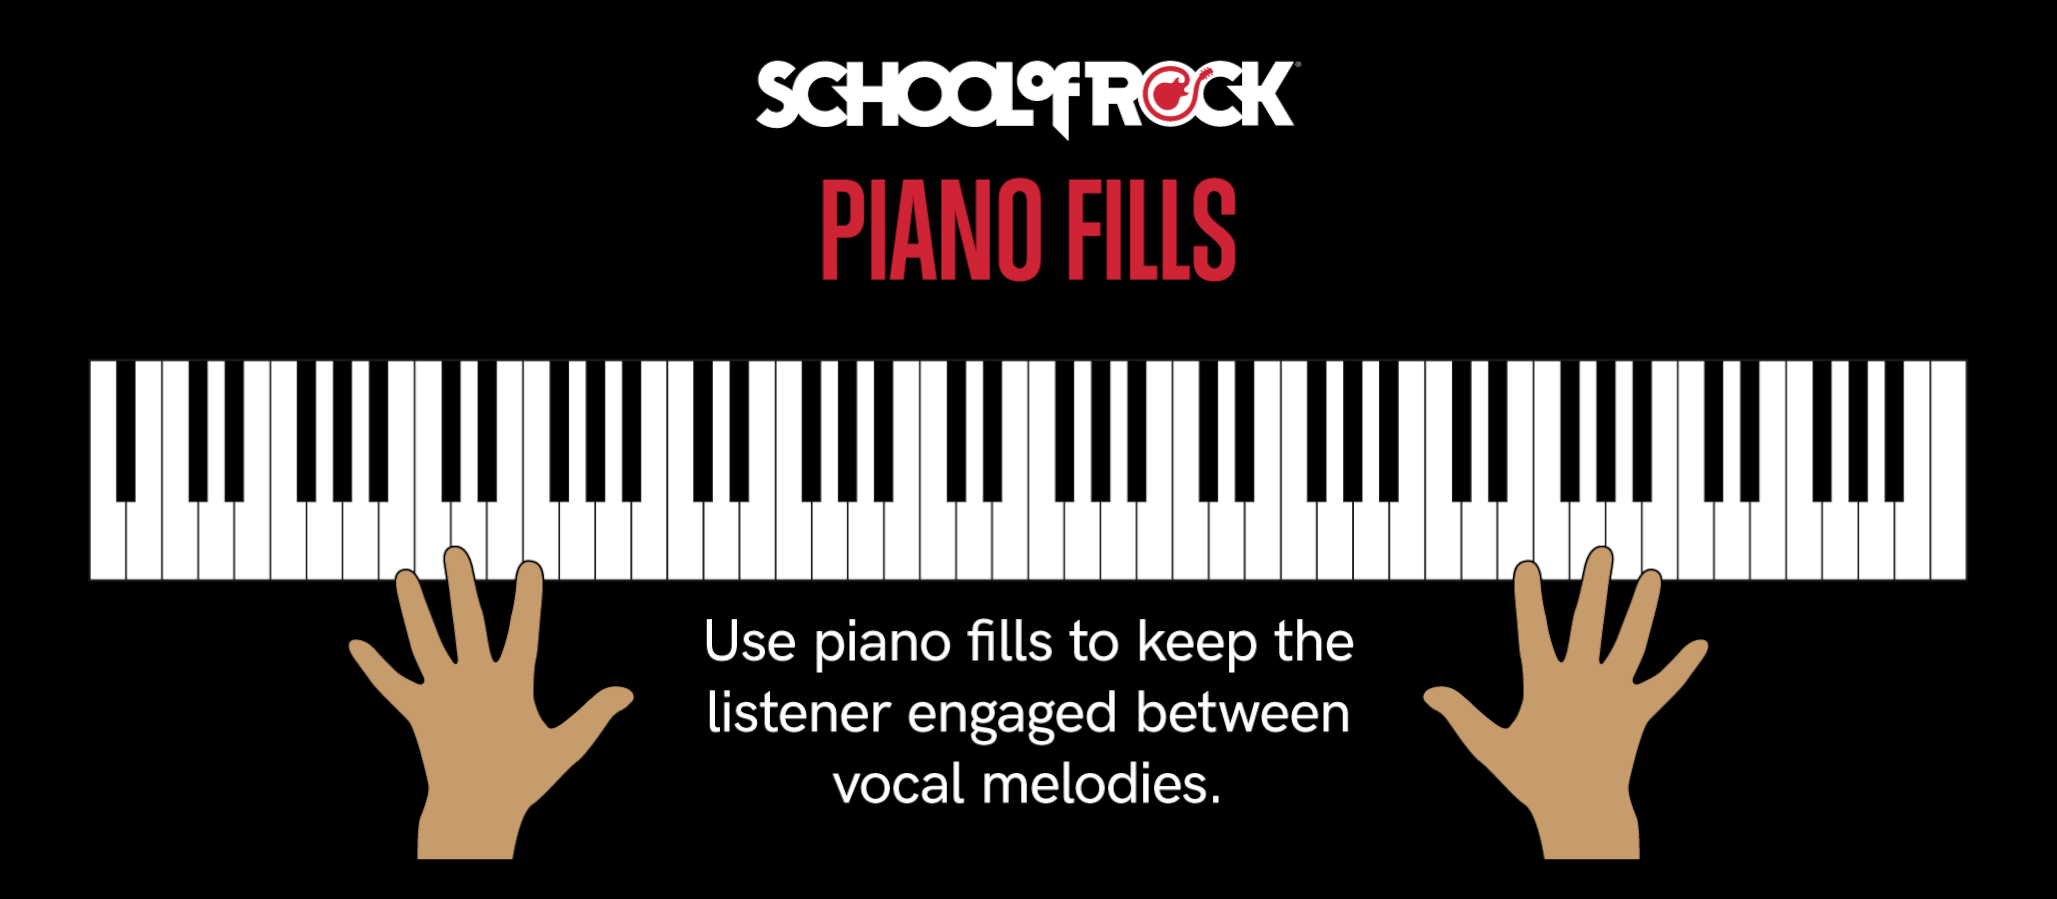 Piano fills are a great way to keep the listener engaged during breaks in the vocal melody or chord progression